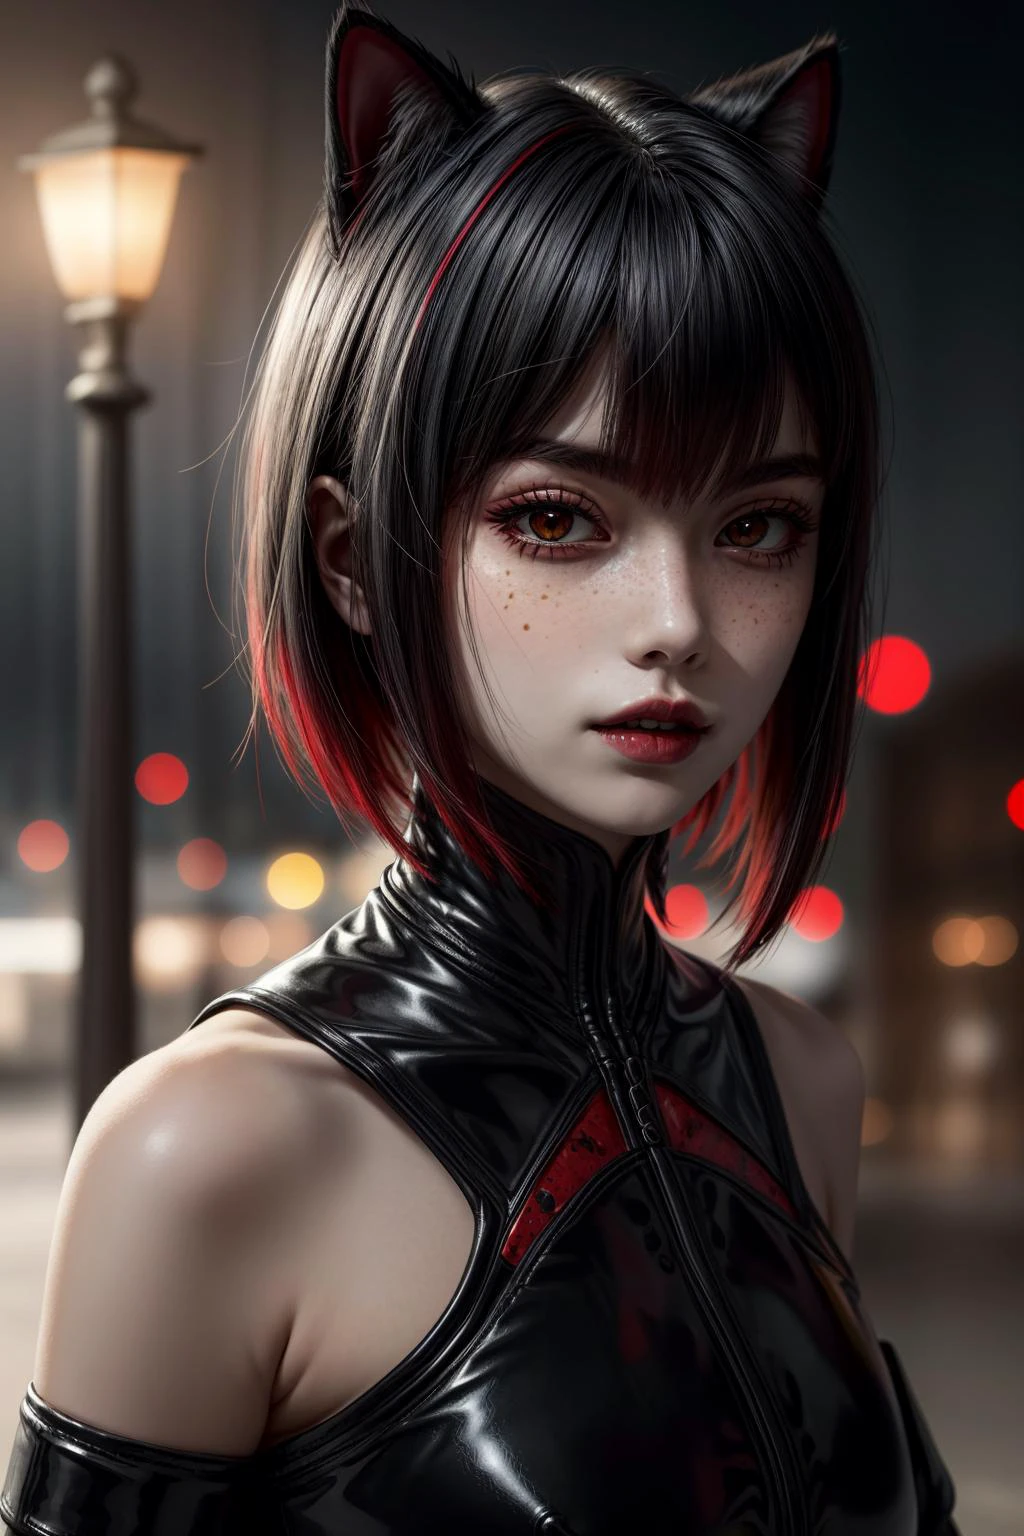 a girl at a park on a date at night with street lights,
blurry background, 
cat ears, 
black makeup, 
closeup, face, detailed eyes, eyes, extreme details, intricate,
red hair, short hair, bob cut, red eyes, 
glow, lights, shiny lights, 
low-cut,
freckles, butterfly,
shiny hair, shiny, shiny skin, shiny clothes, realistic, (photorealistic:1.1)
goth,black lipstick countess (paragon), paragon, latex, female